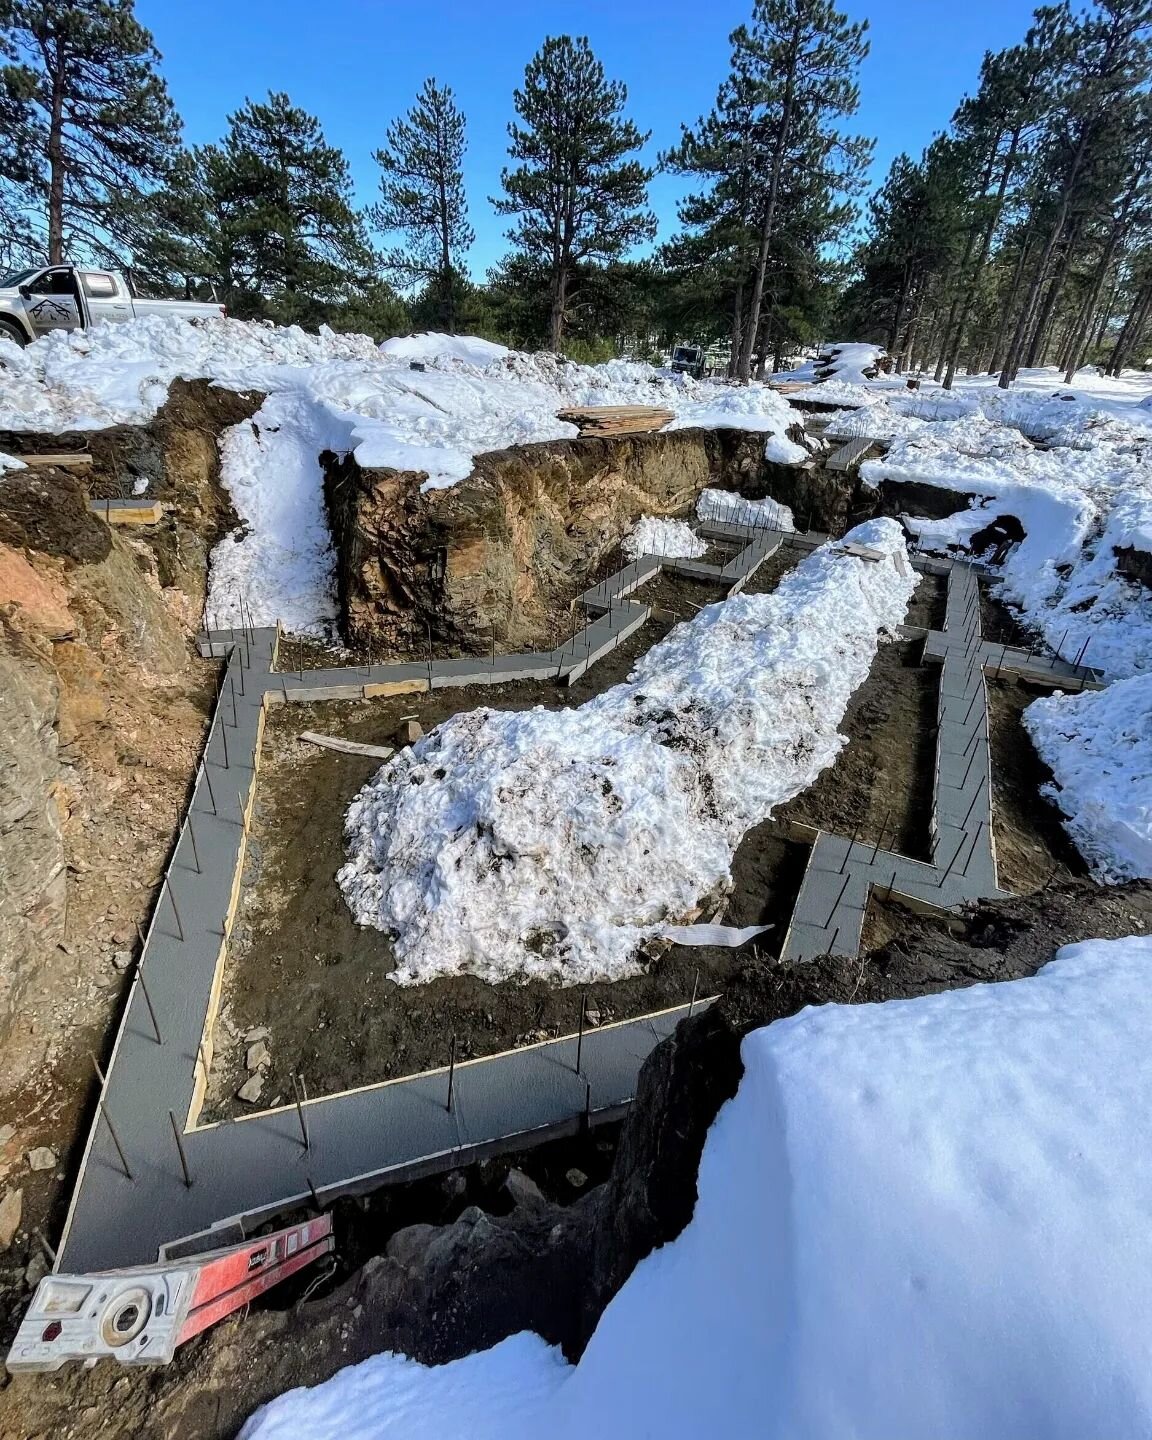 A little (or a lotta) snow doesn't stop our subcontractor partners from pouring foundation footings! We get it done! 

#buildinginallweather #buildinginthemountains #generalcontractor #footings #constructionpartners #subcontractor #concrete #customho